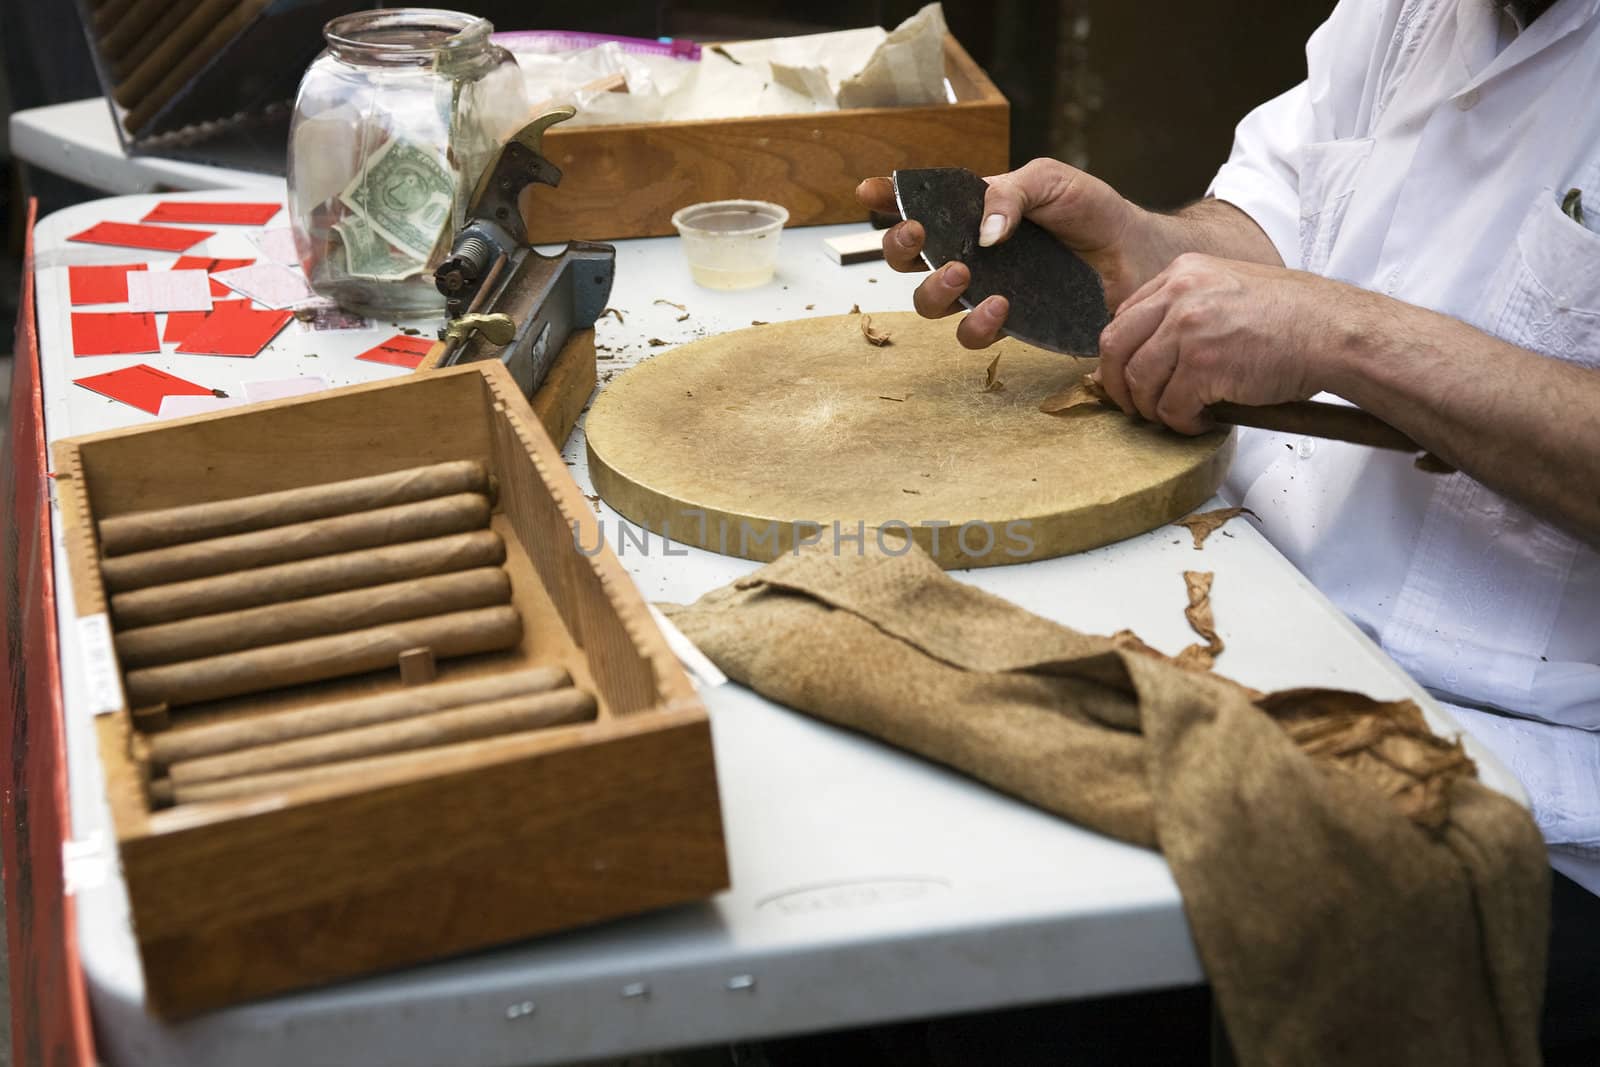 Man hand-rolling cigars at a table.







Rolling cigars